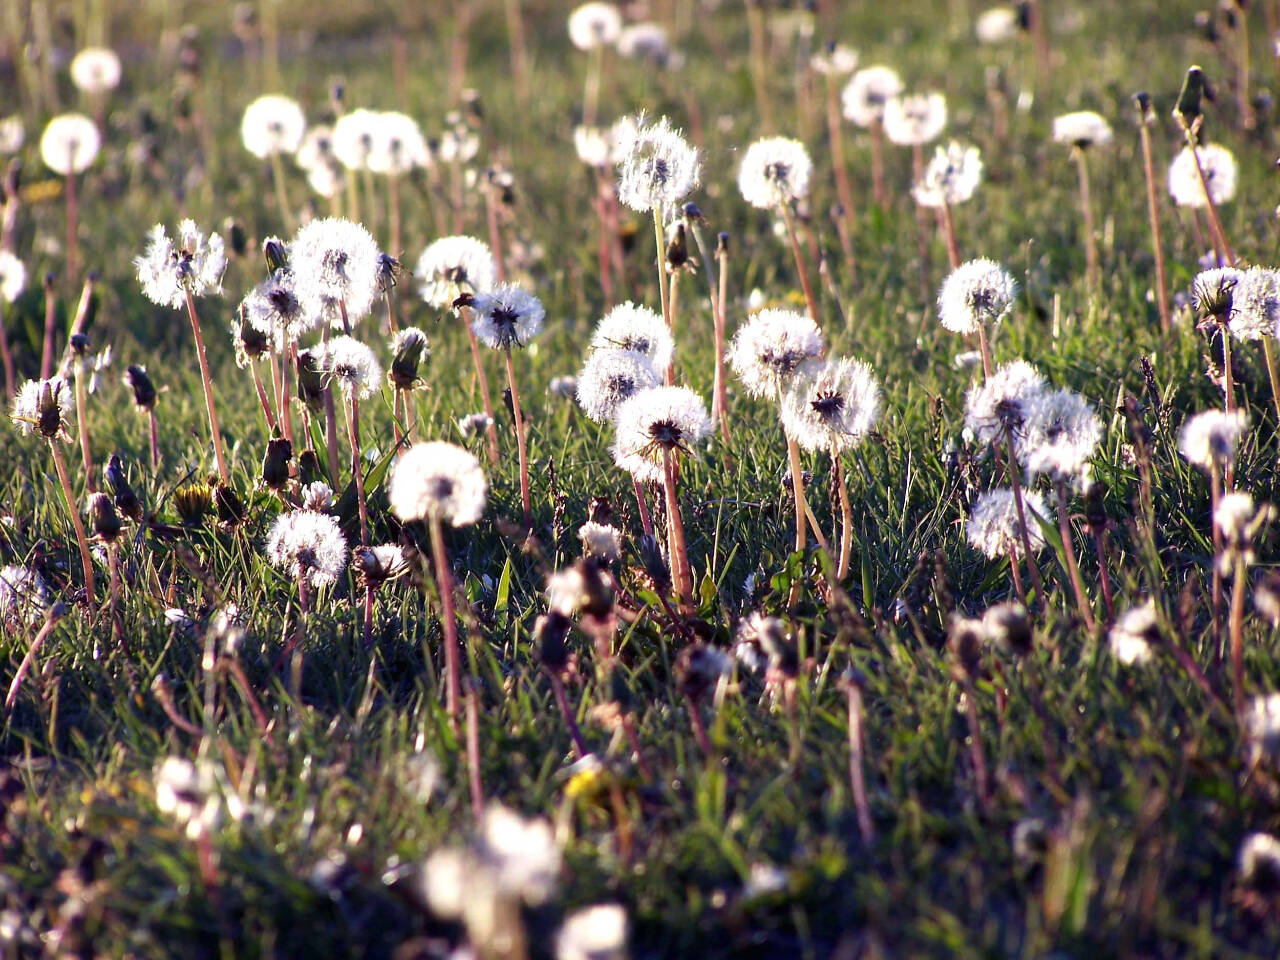 Photo by David Whiting
Dandelions spread about 15 thousand seeds per plant, spreading millions of seeds into their surroundings over time. Find out more on stopping weeds in your garden, such as dandelions, before they multiply, at the next Green Thumb Garden Tips presentation. David Whiting discusses “Where Are All The Weeds?” from noon-1 p.m. on Thursday, Jan. 26, at the Port Angeles Library.